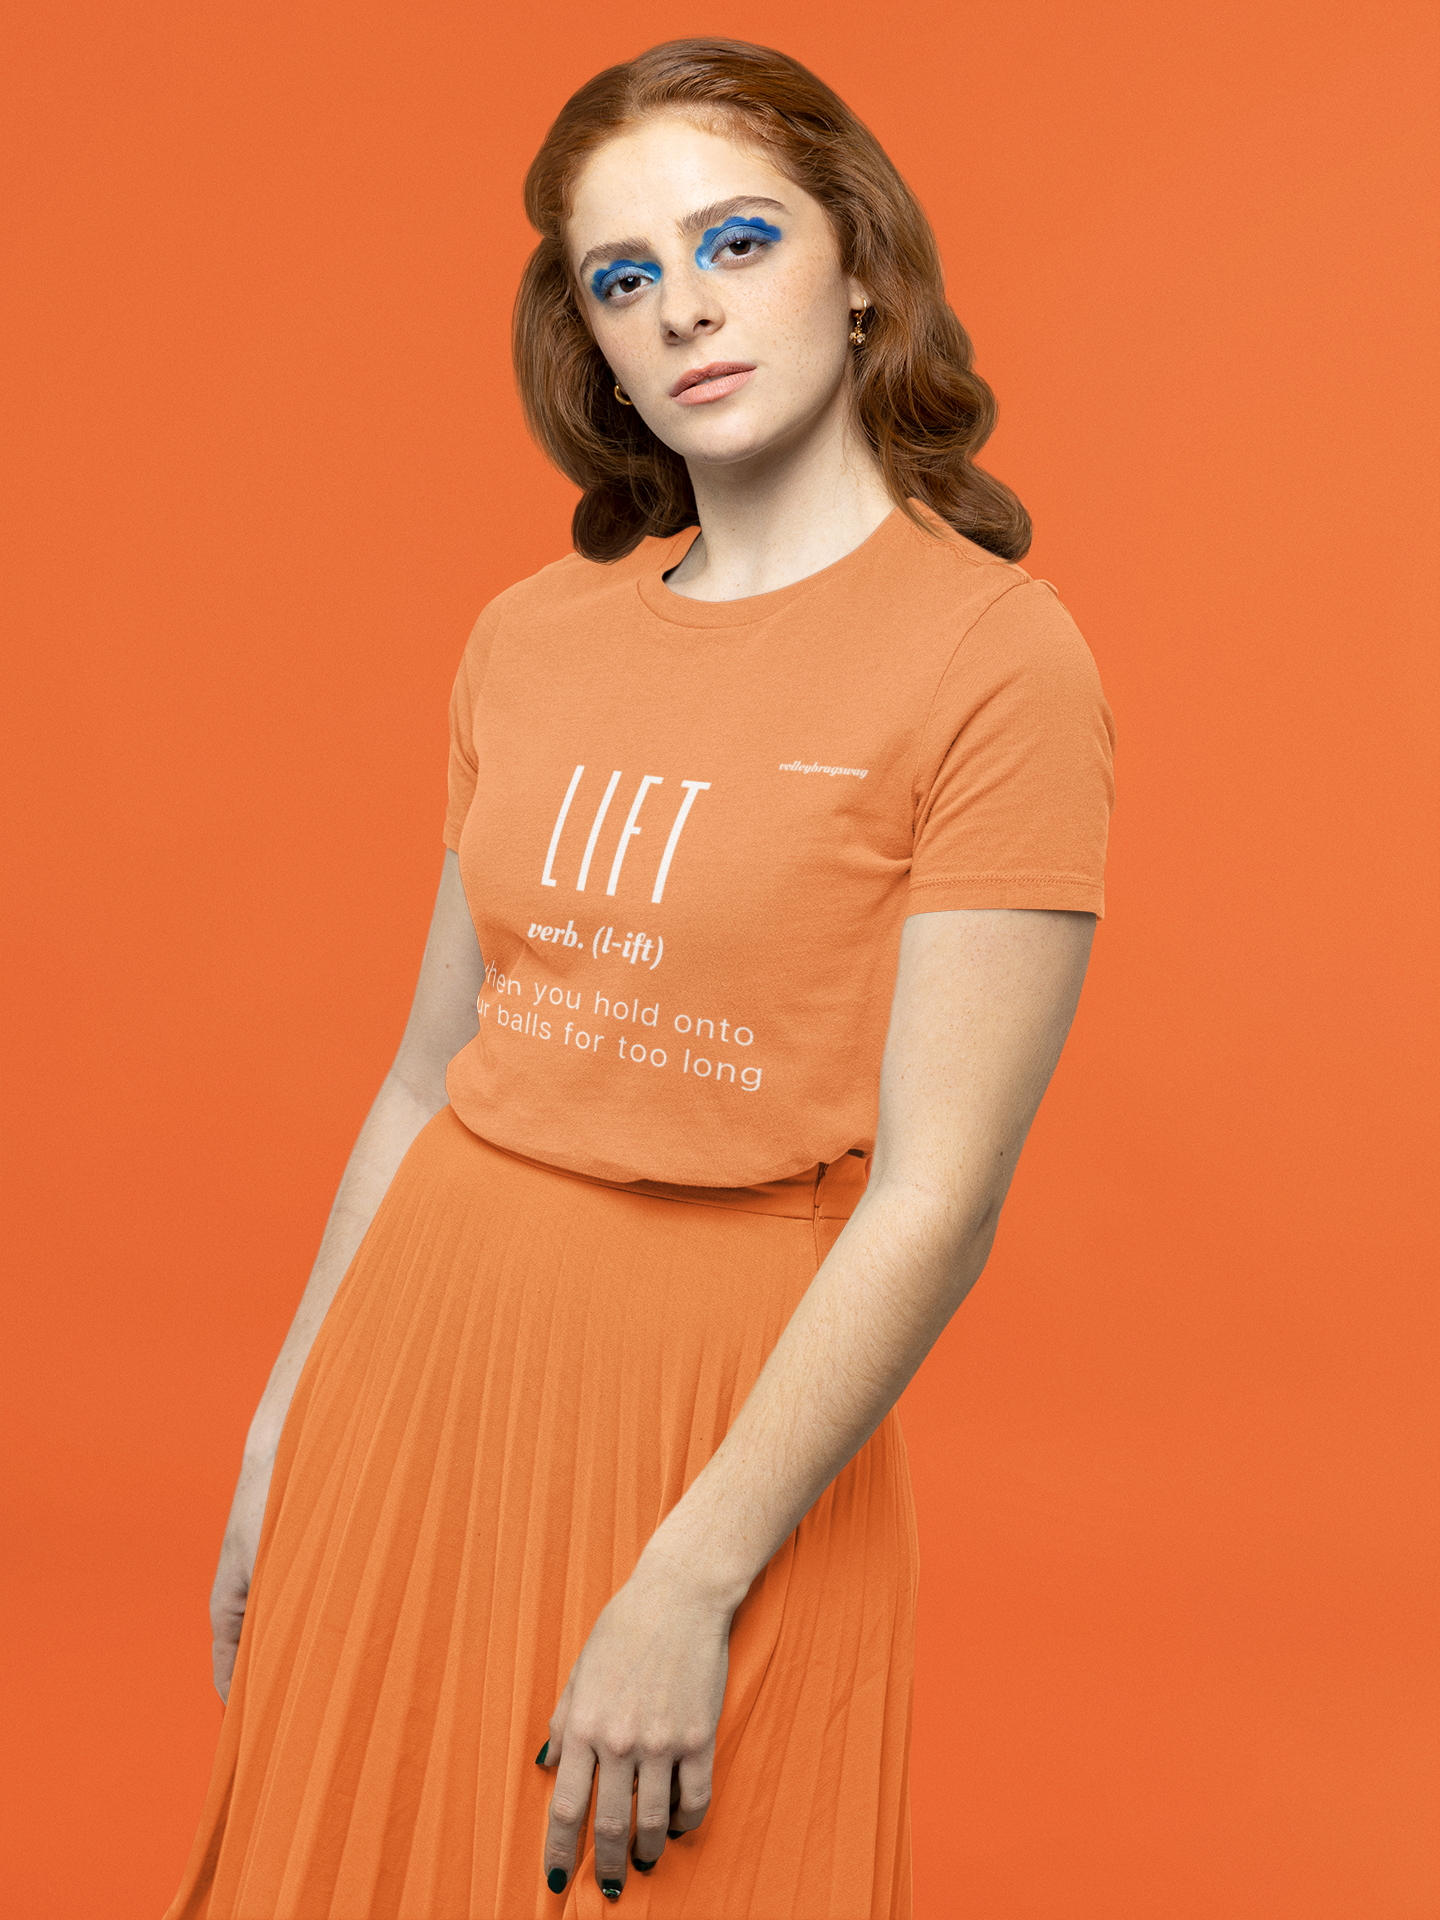 LIFT (verb) When You Hold Onto Your Balls For Too Long volleyball shirt. April Chapple, Launches a Hilarious Volleyball T-shirt Line With Fun Tongue-in-Cheek Designs sure to make players and enthusiasts laugh.